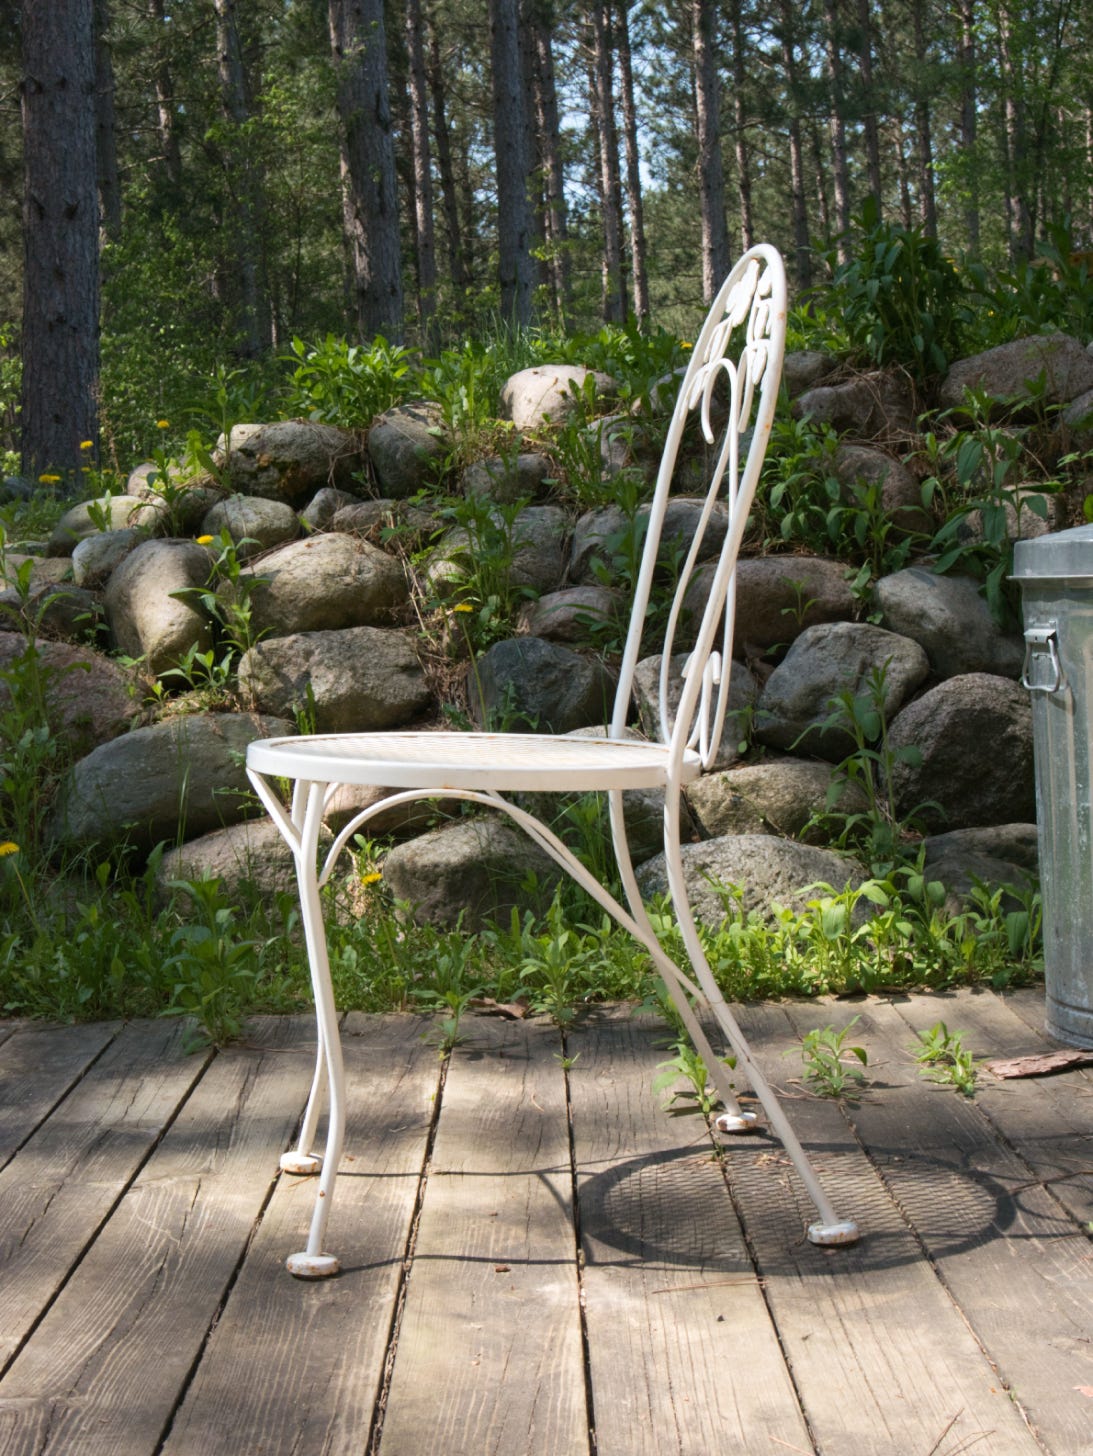 White chair foreground. Large rocks and trees in background.